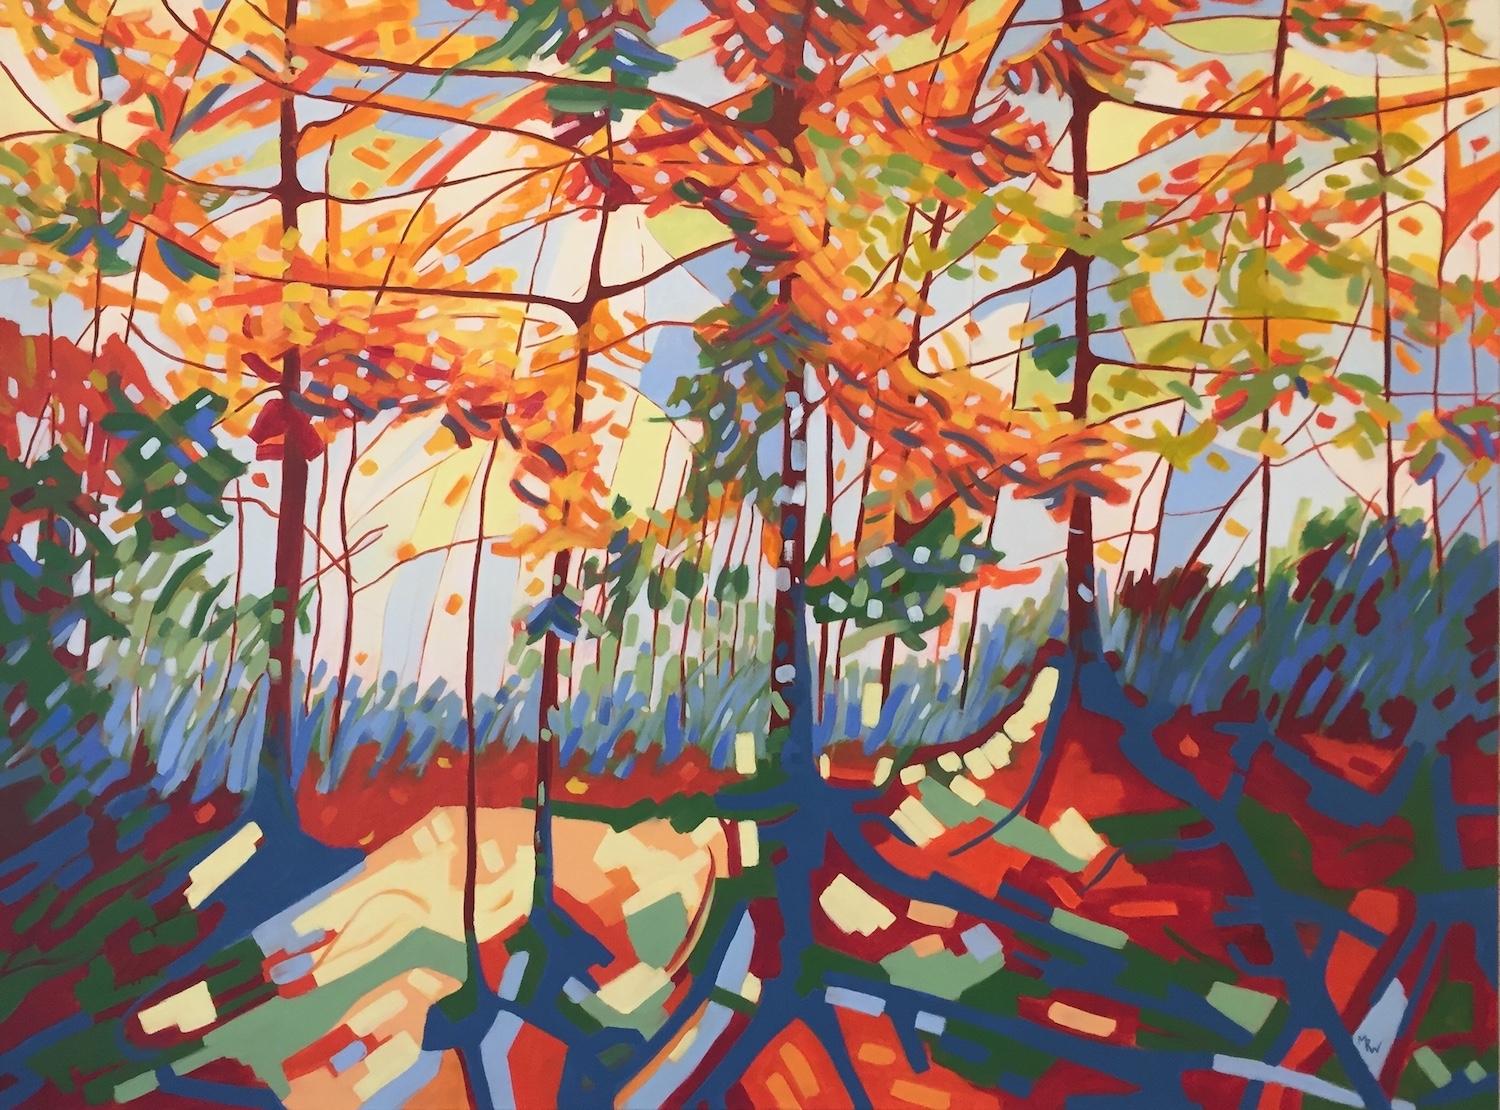 "Preludio", contemporary, trees, red, green, orange, yellow, blue, oil painting - Painting by Marcia Wise